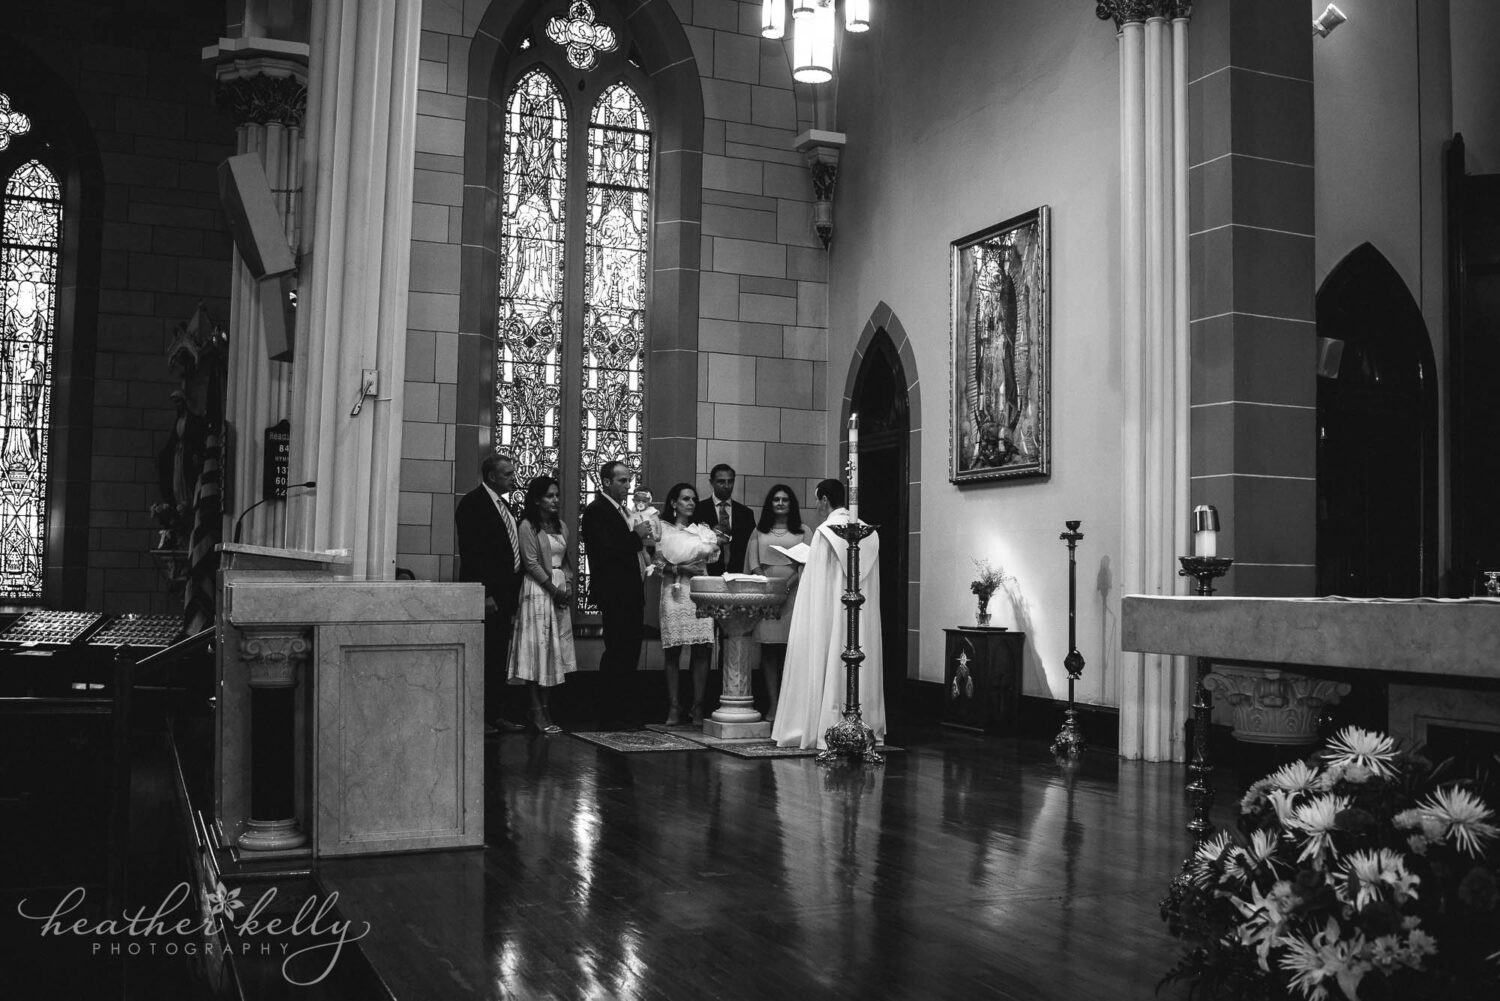 A pullback image of a baptism in wallingford ct